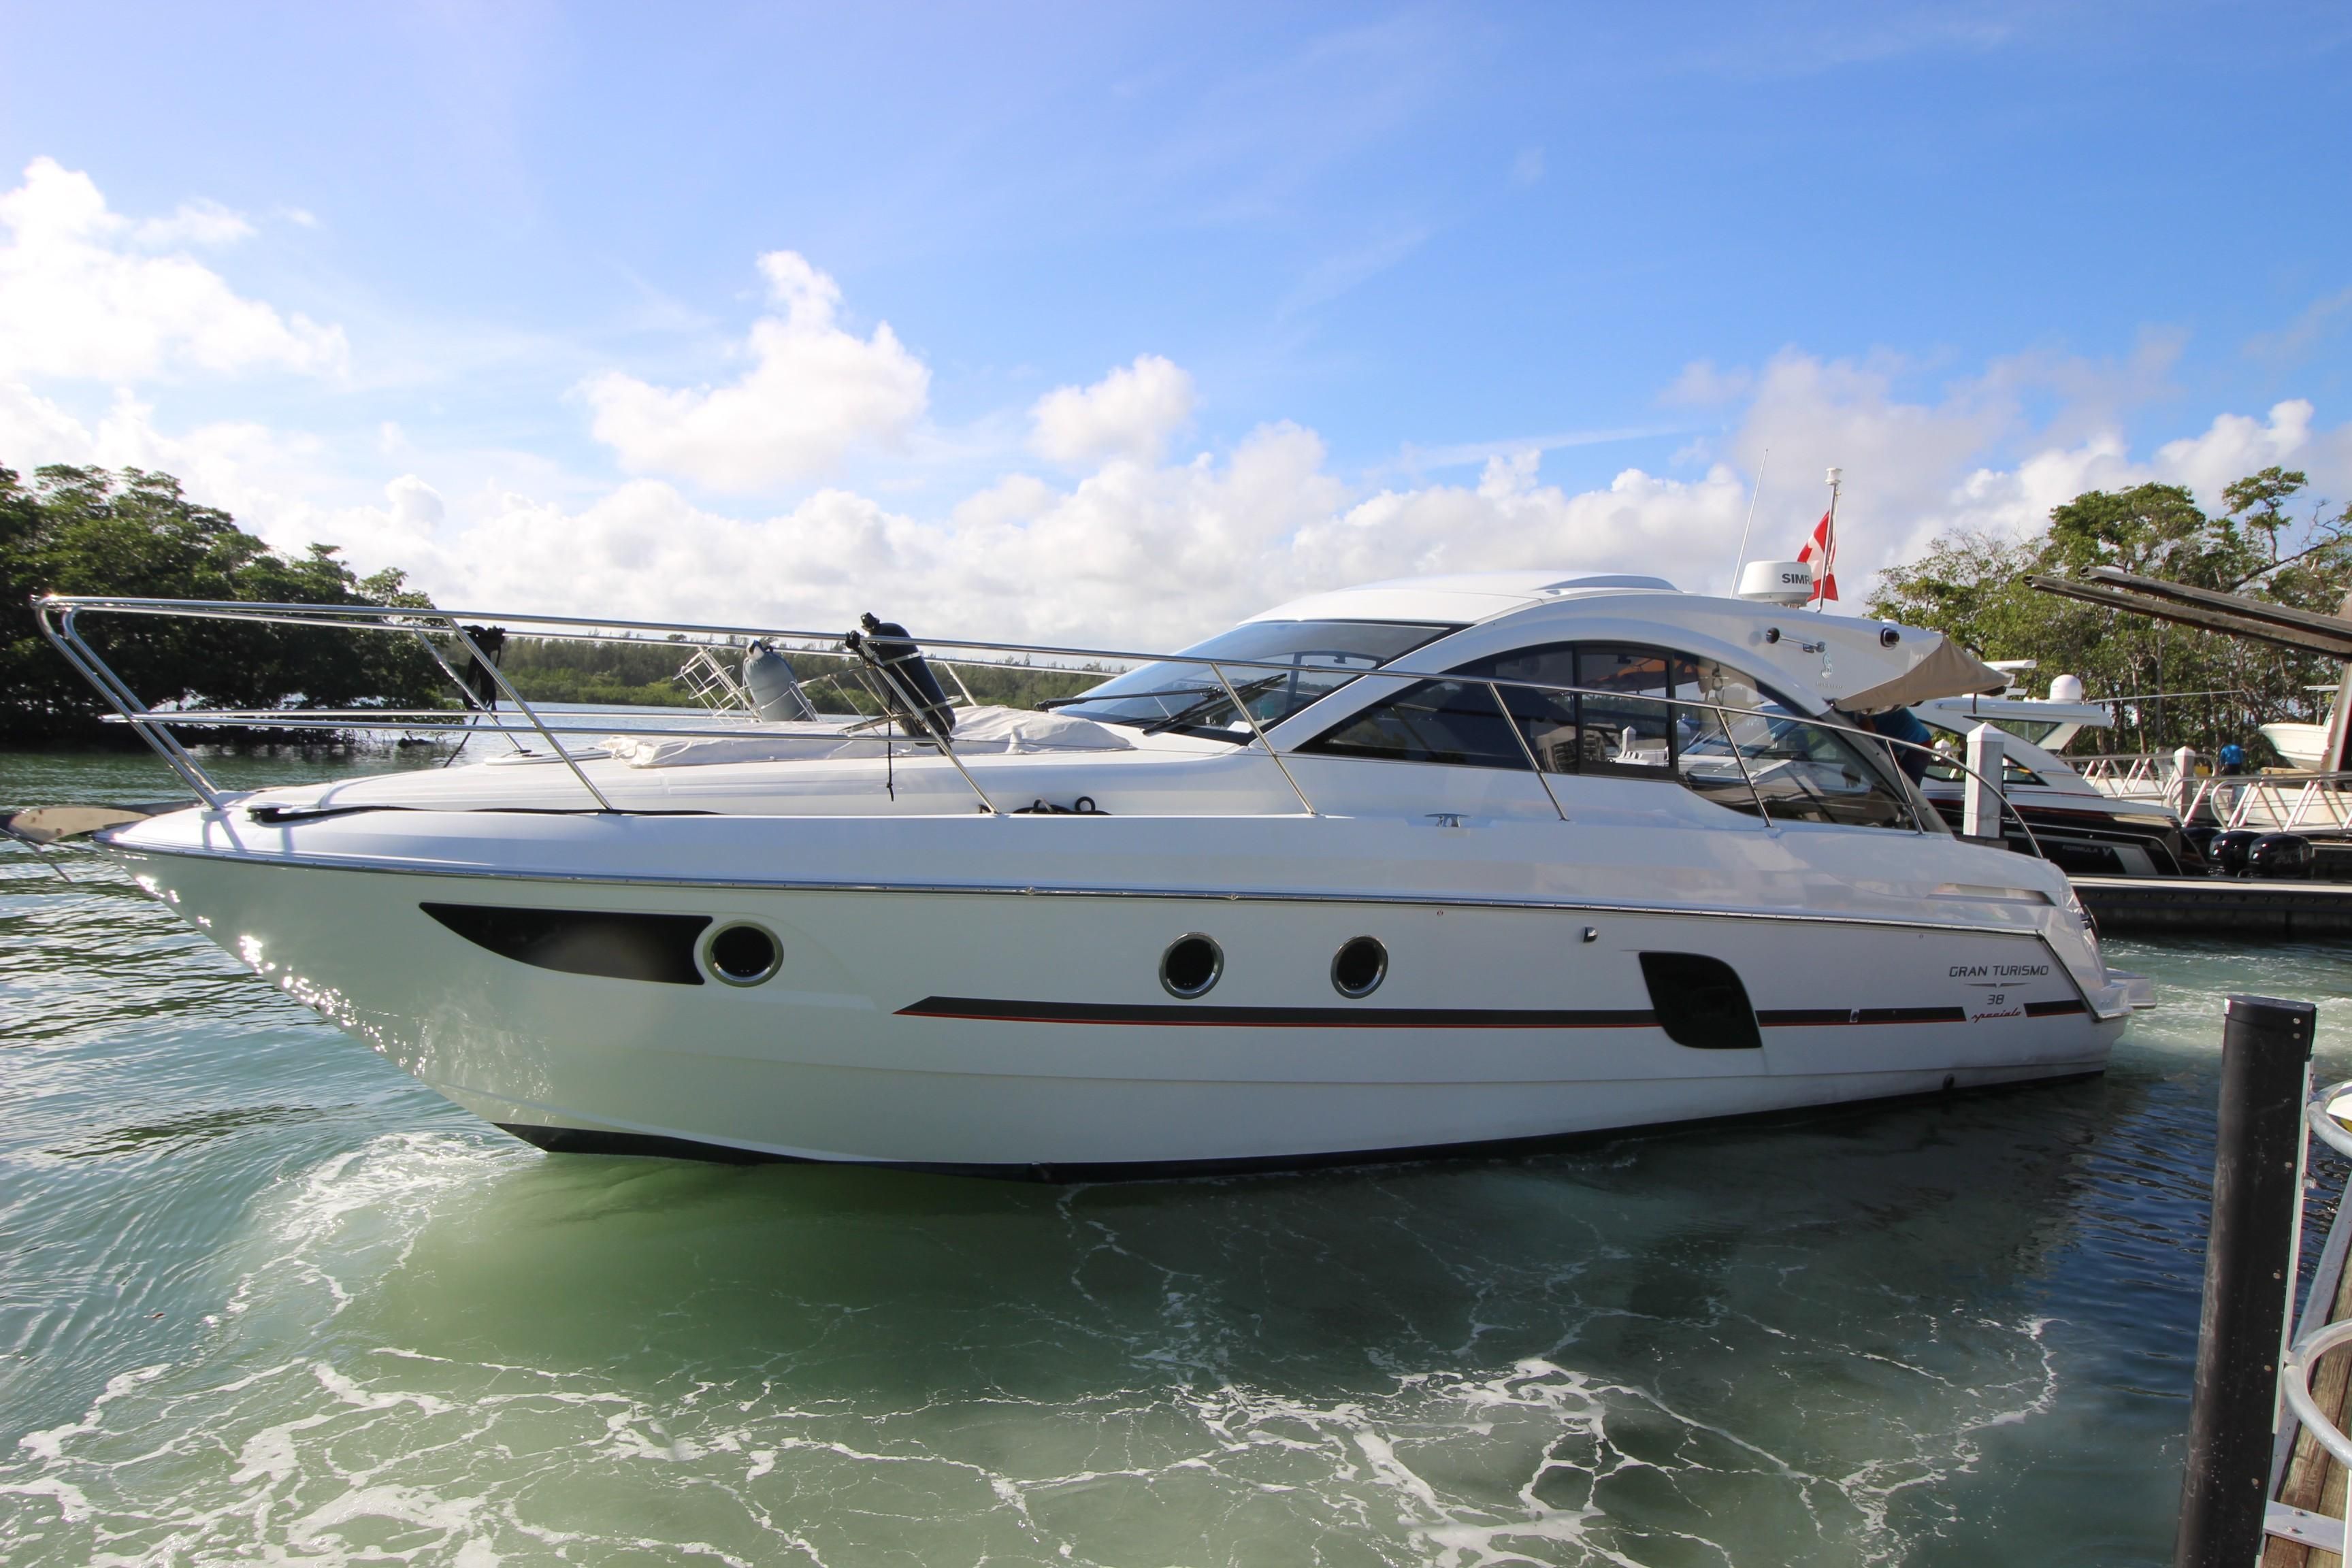 38 ft motor yachts for sale